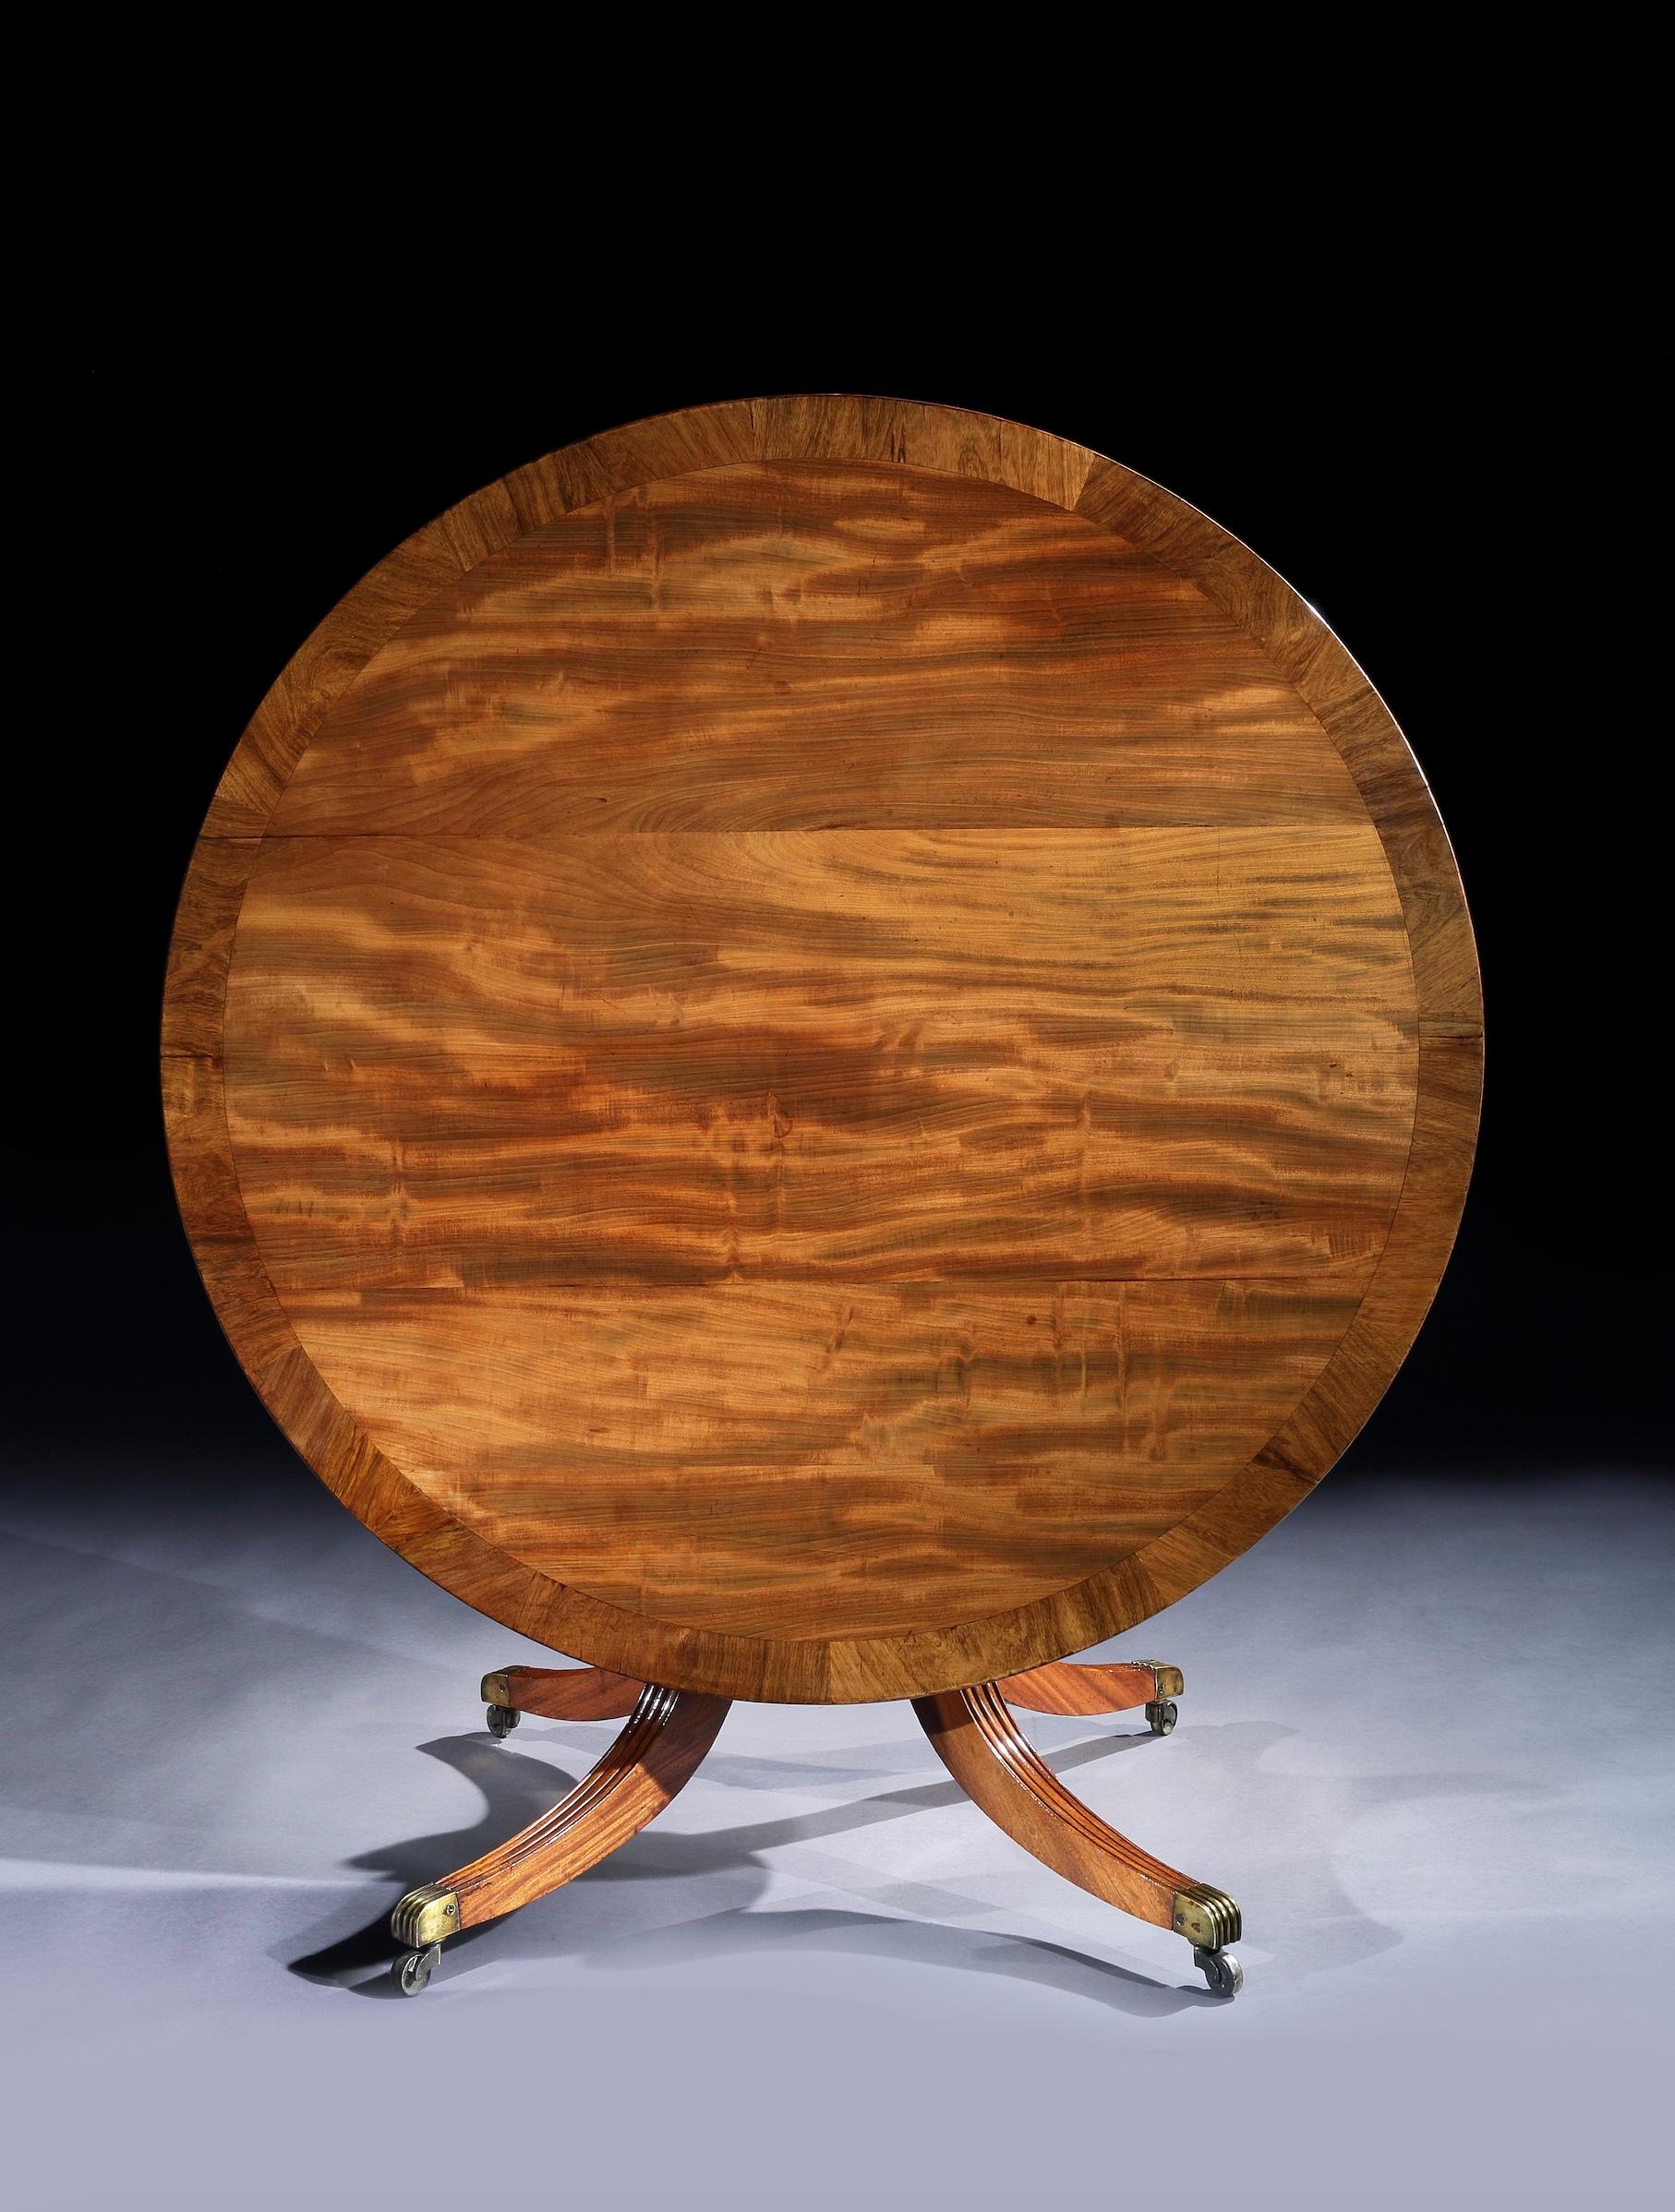 A fine early 19th century mahogany breakfast or centre table. The circular top with a wide mahogany cross-baned border, on a central turned pedestal support with four hipped outsplayed reeded legs, terminating in brass castors.

Of good colour